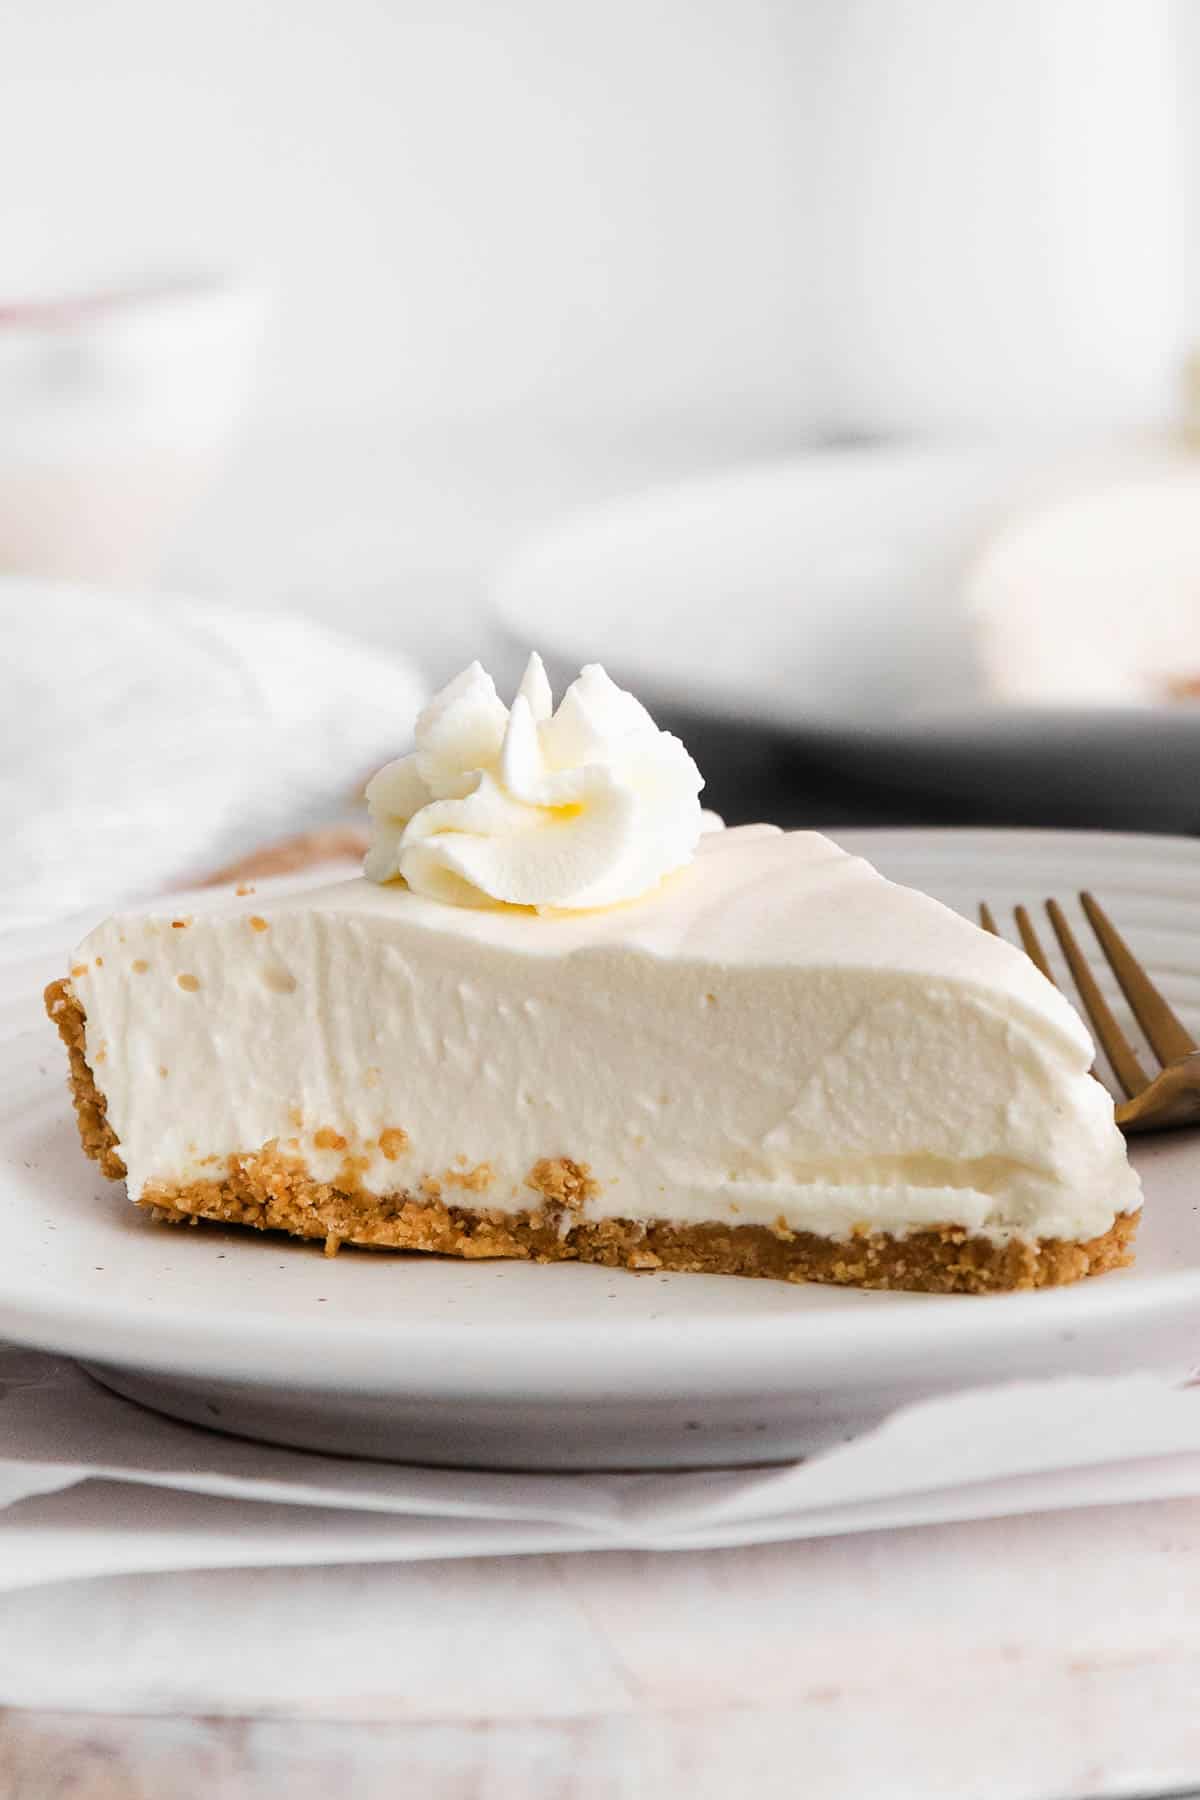 A slice of gluten-free no-bake cheesecake on a plate